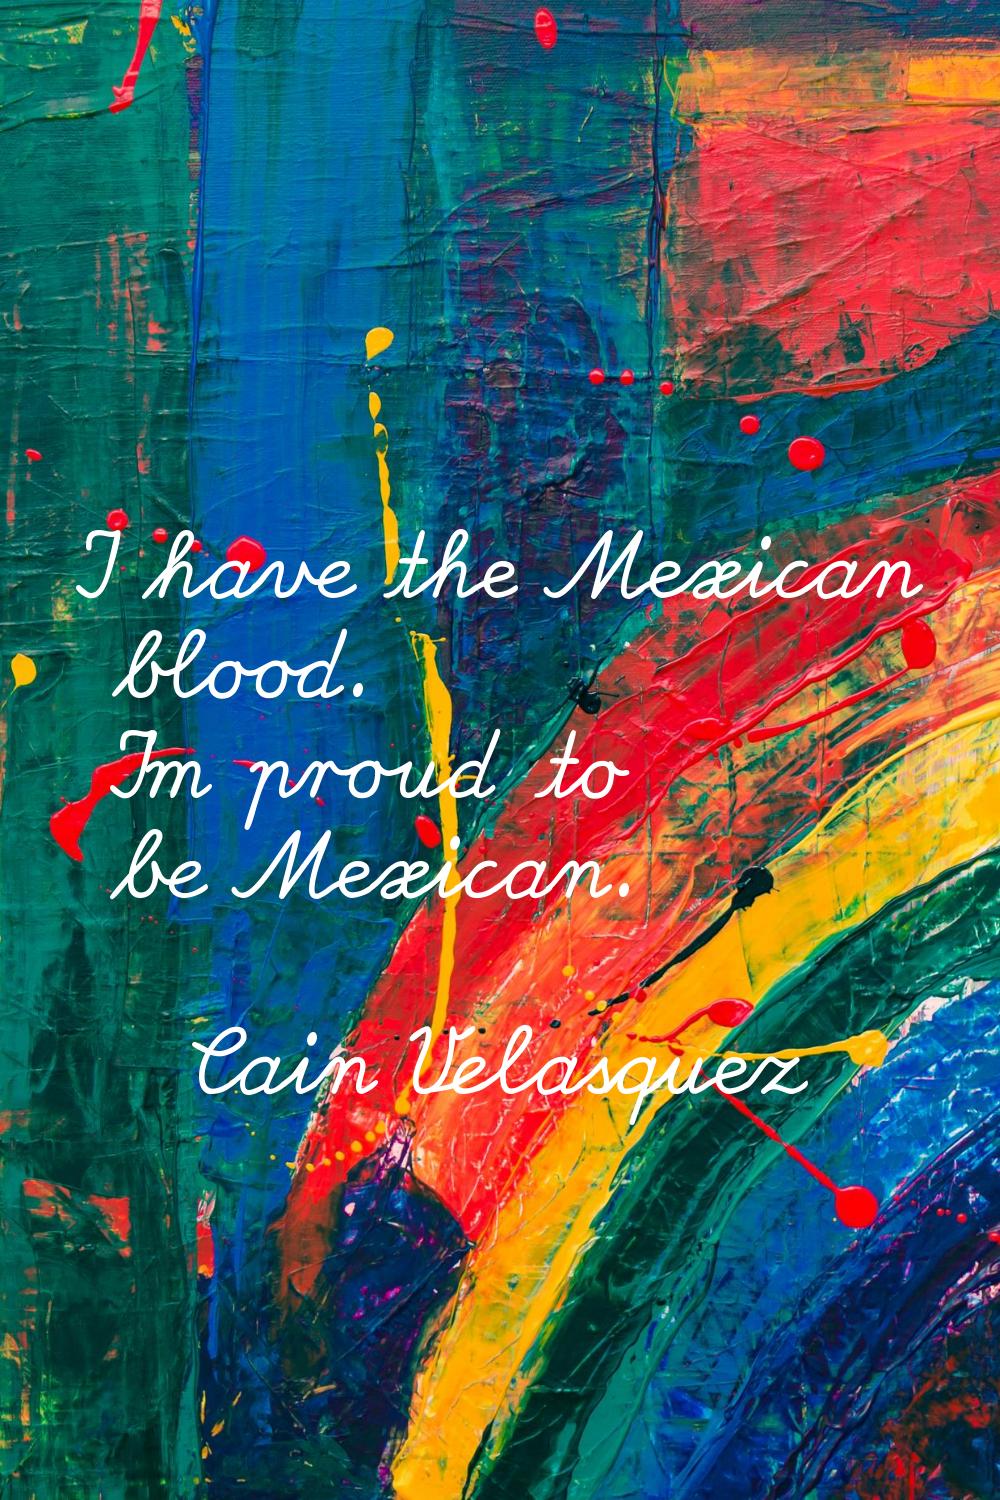 I have the Mexican blood. I'm proud to be Mexican.